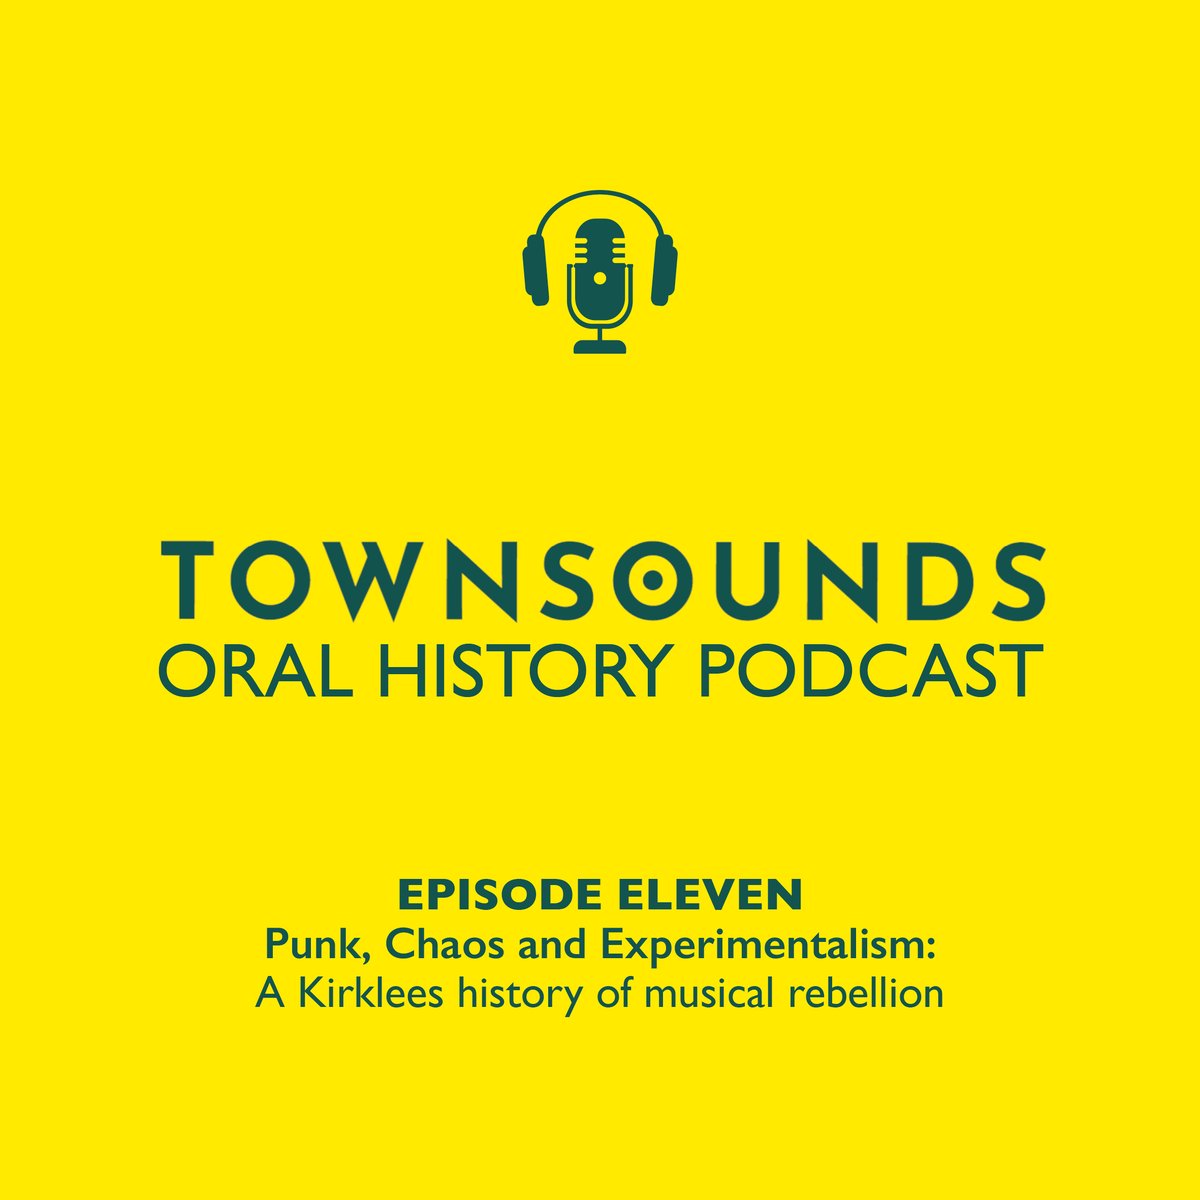 Episode 11 of the @_town_sounds_ podcast is out now! In this episode, @MusicOfSamh explores the history of musical rebellion in Kirklees, featuring determined musicians & musical facilitators with rugged determination. Listen: musicinkirklees.co.uk/en-UK/topic/63… @letsgoyorkshire #KYOM23